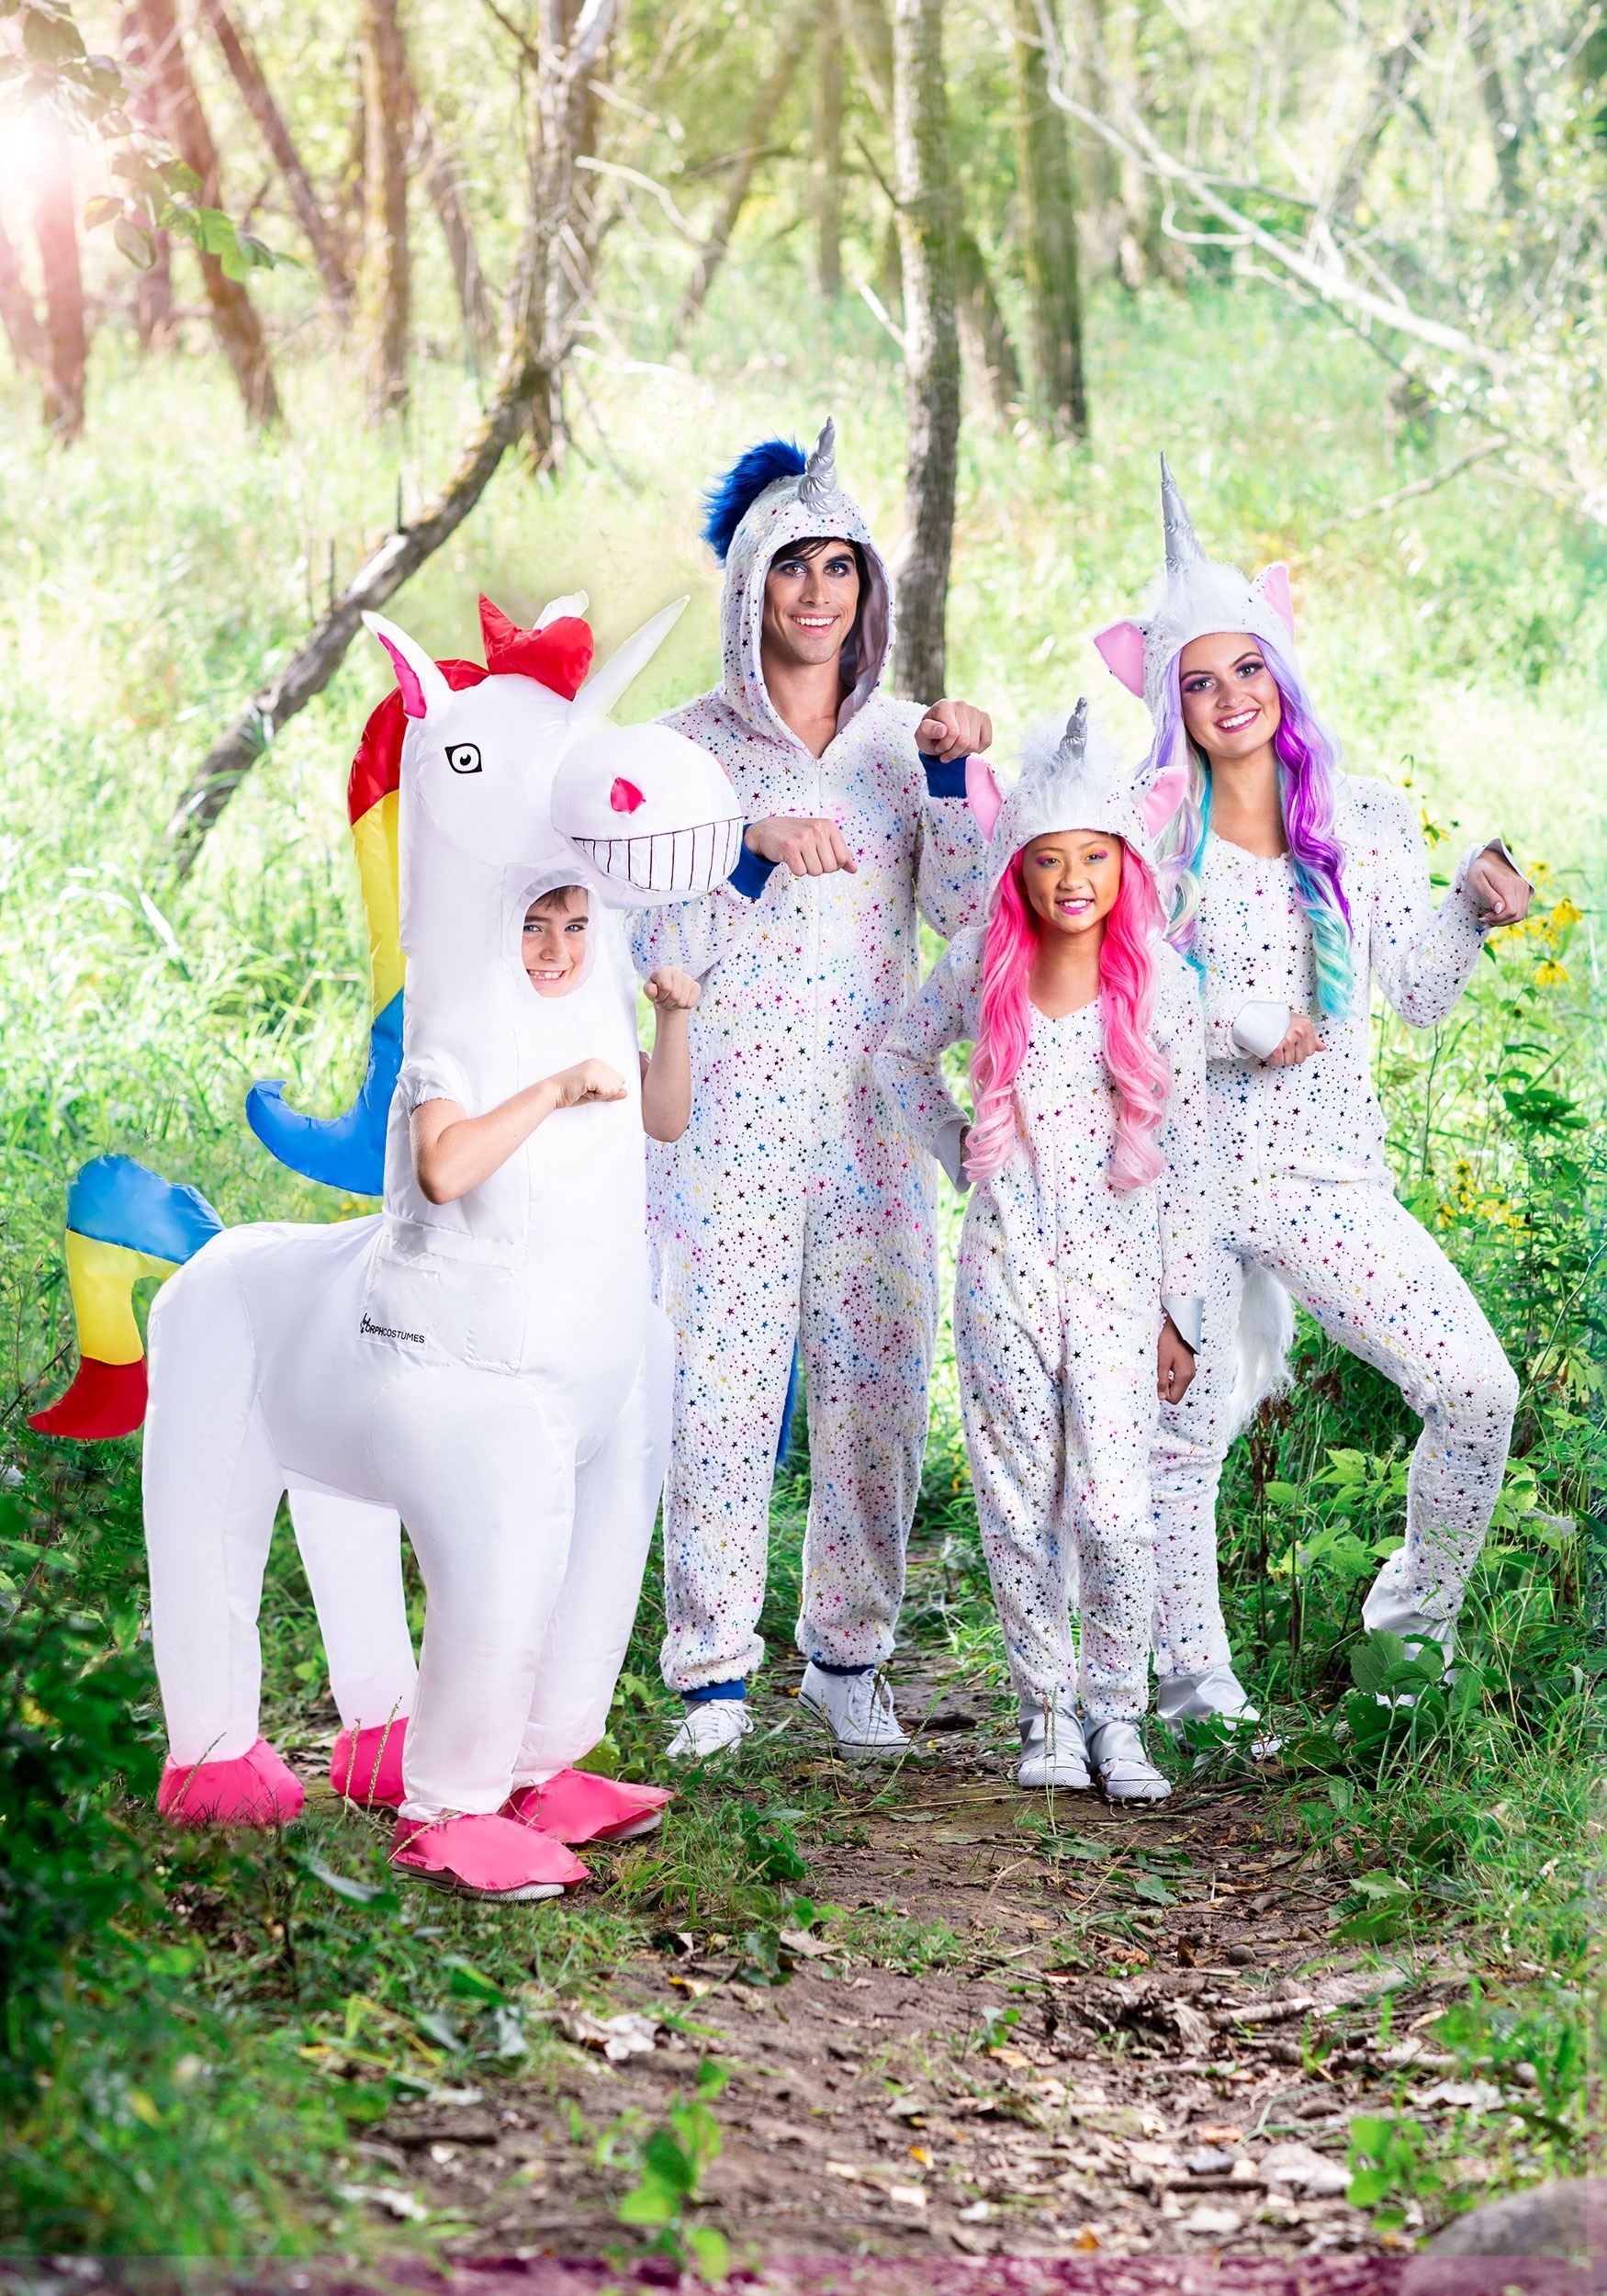 Giant Inflatable Unicorn Costume For A Child